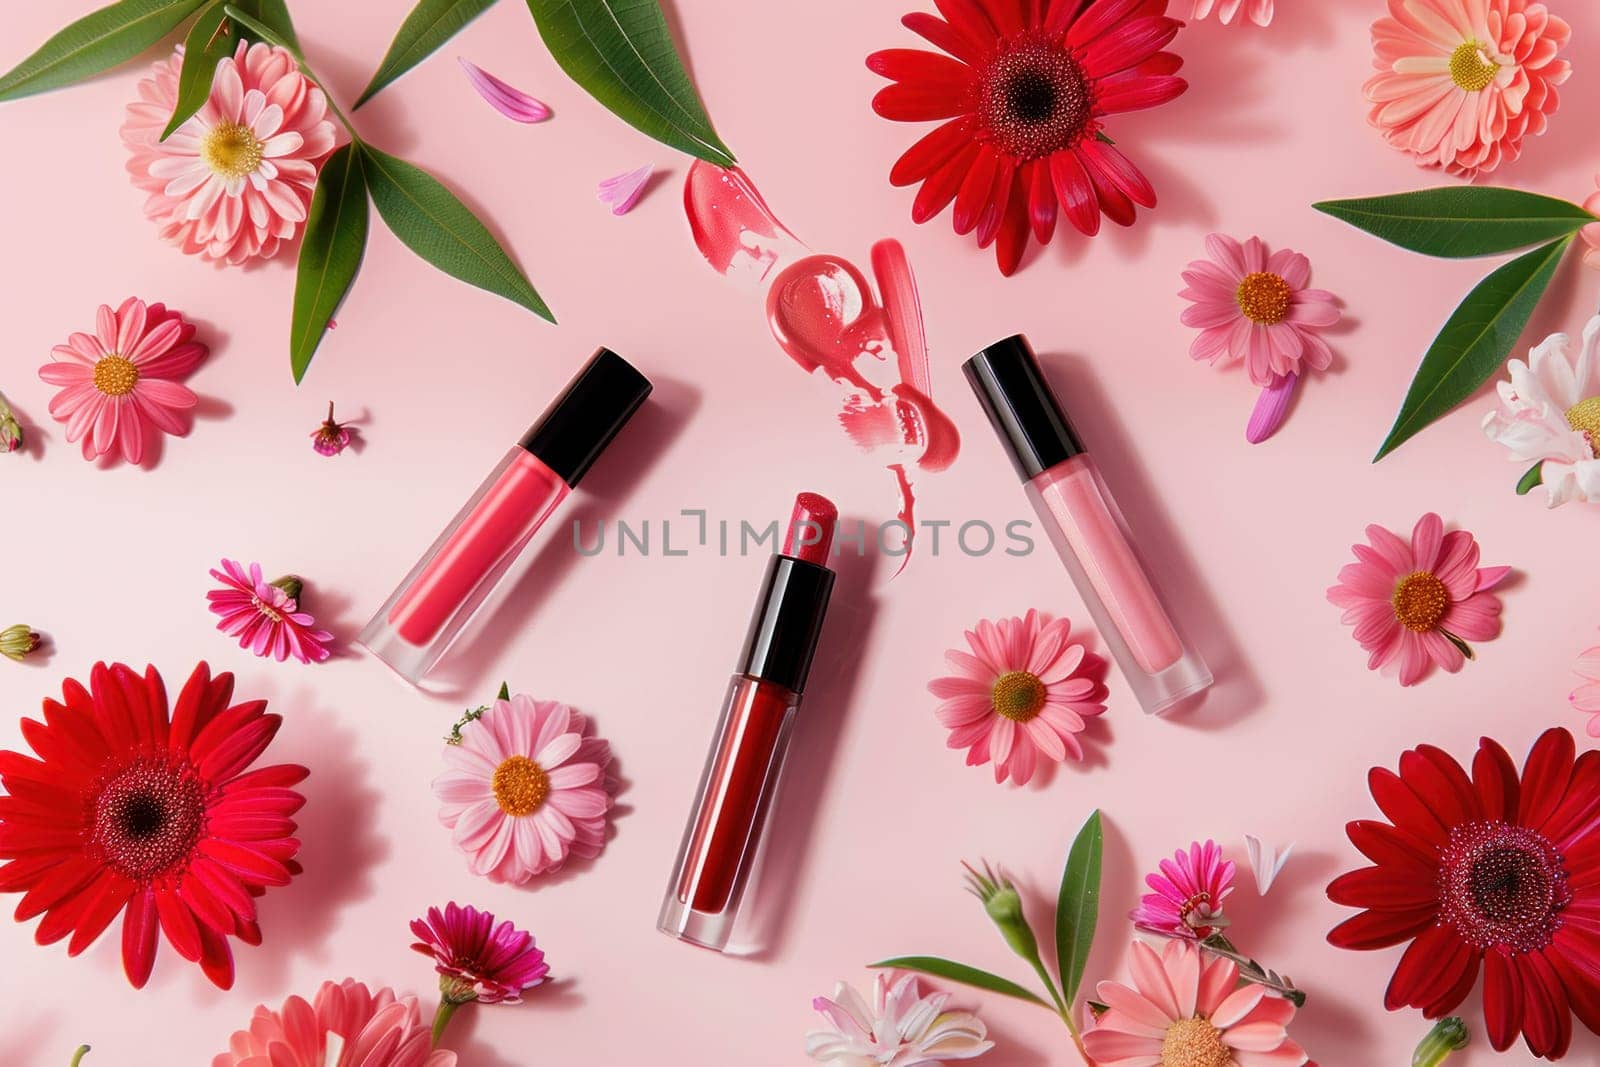 Beauty and fashion essentials displayed on pink background with flowers and liquid lipstick, top view flat lay concept by Vichizh